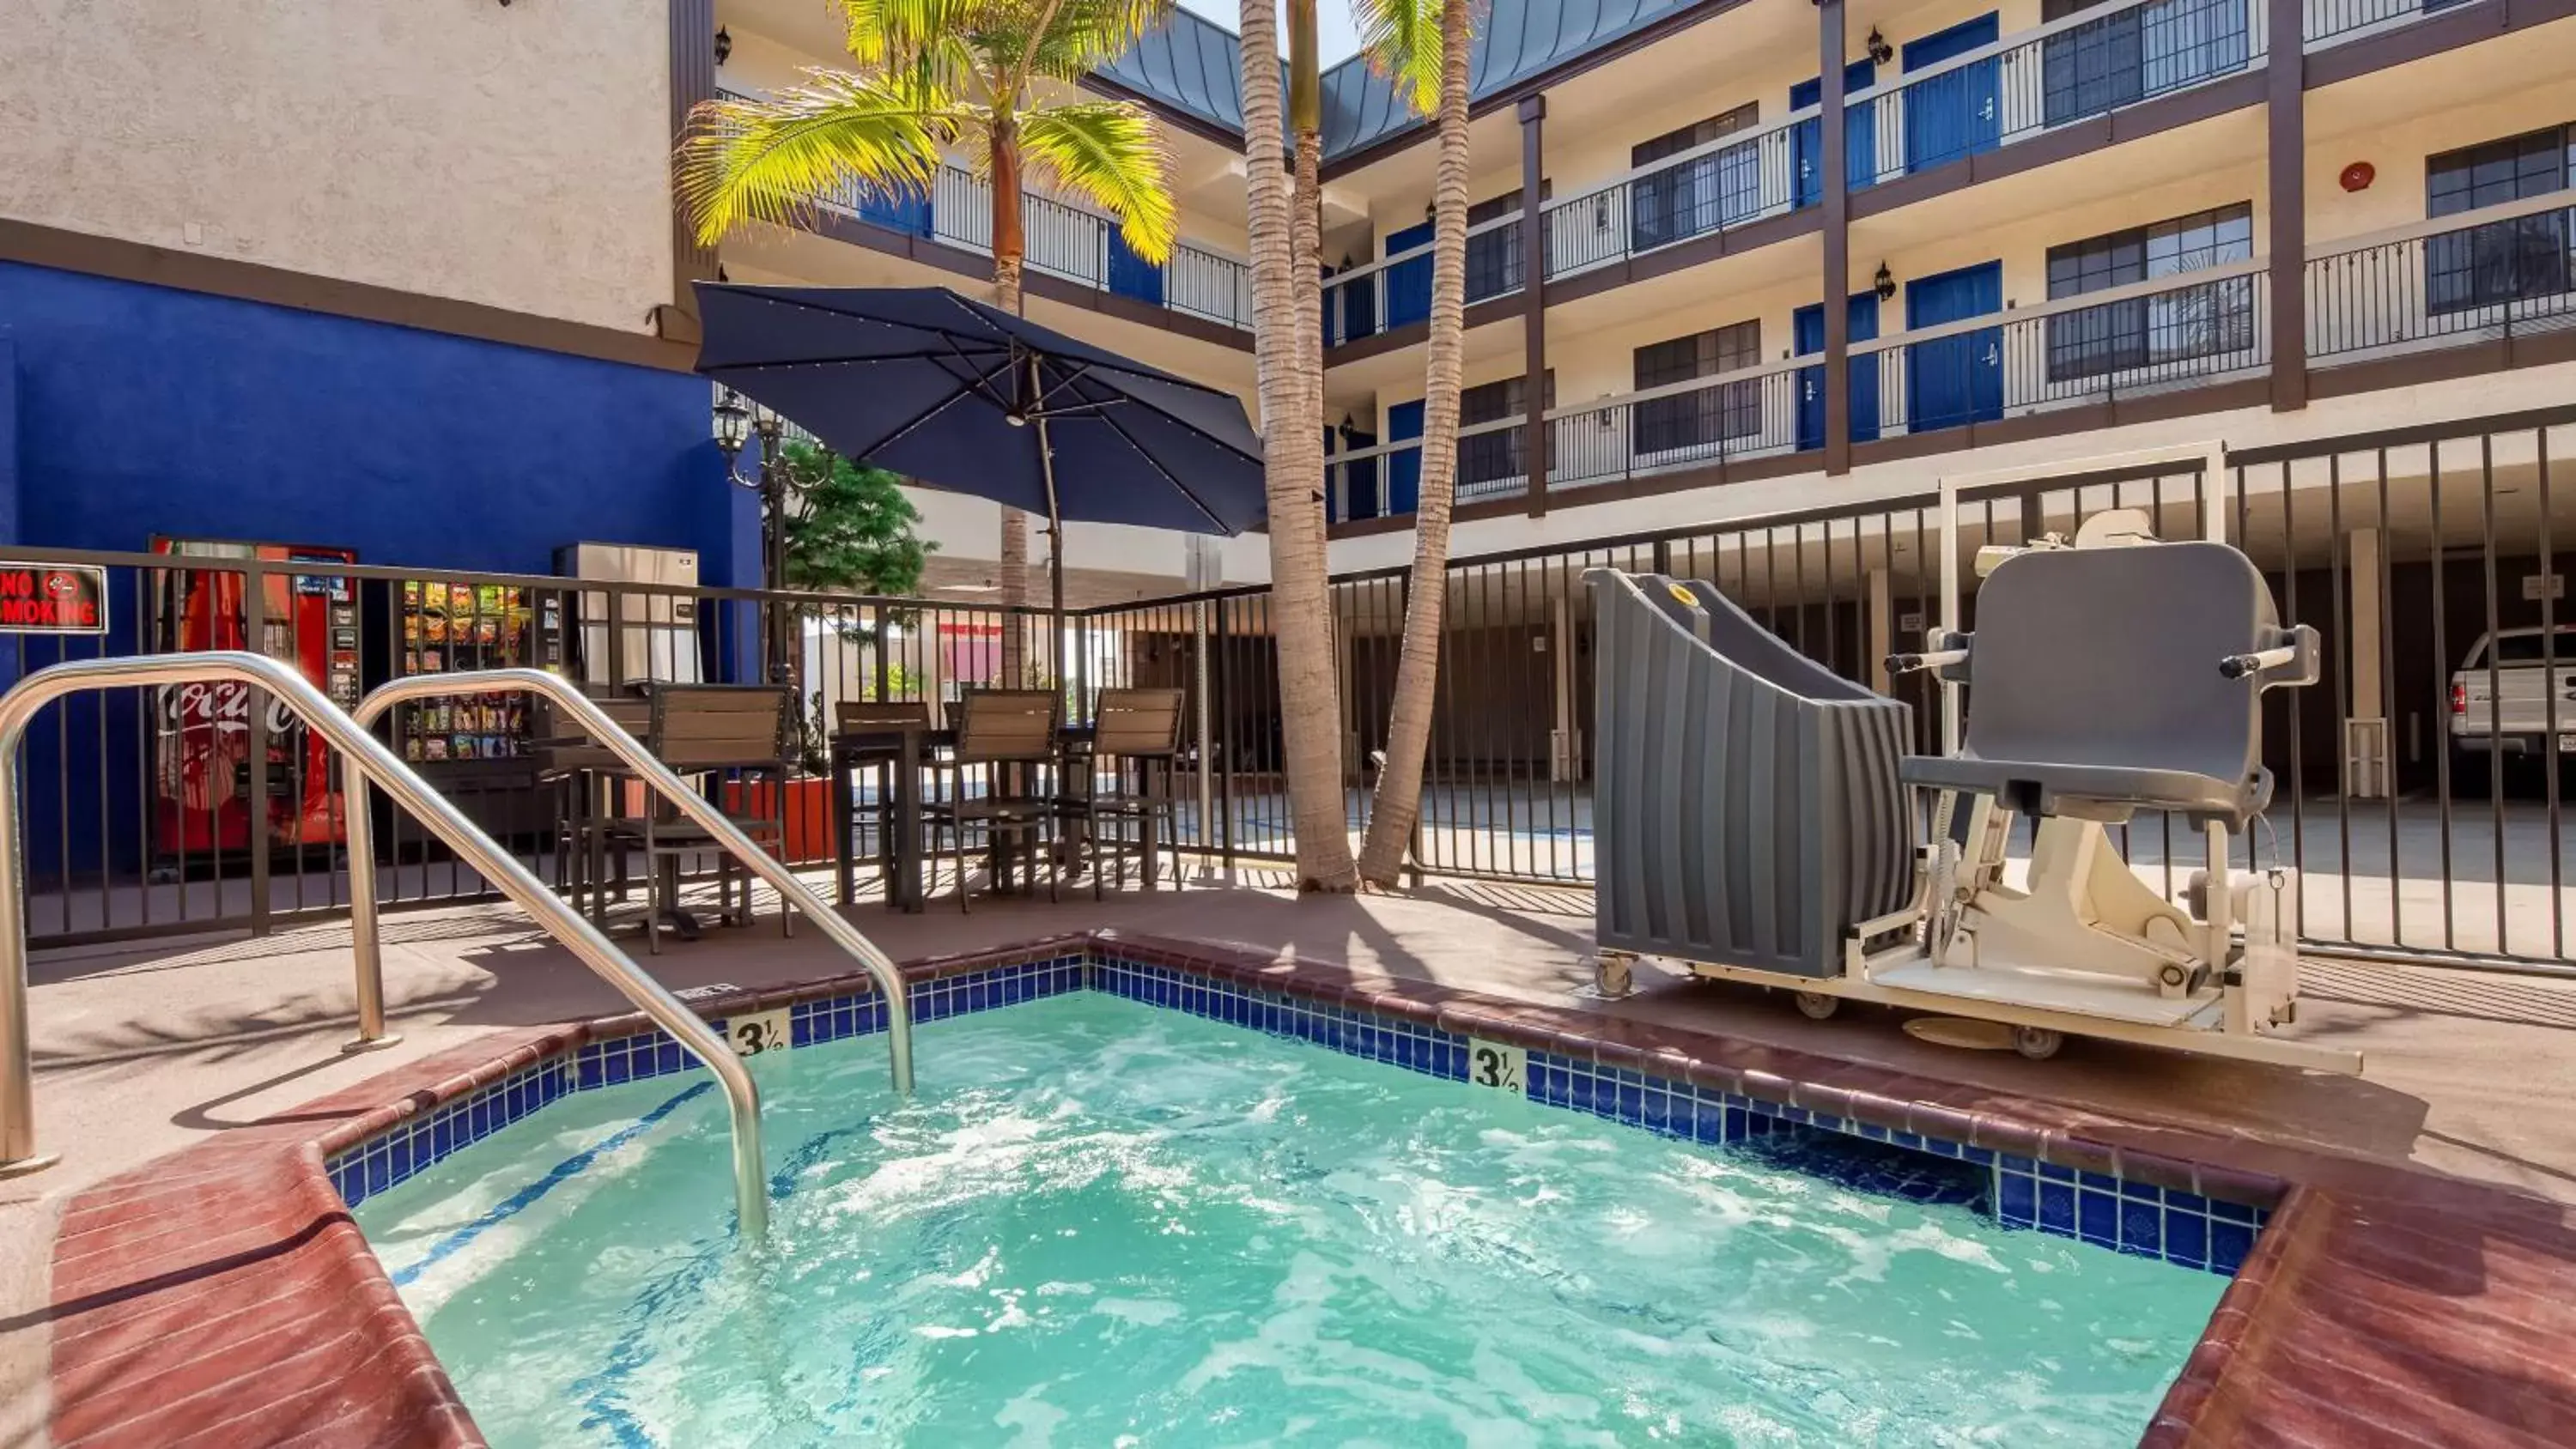 On site, Swimming Pool in Best Western Airport Plaza Inn Hotel - Los Angeles LAX